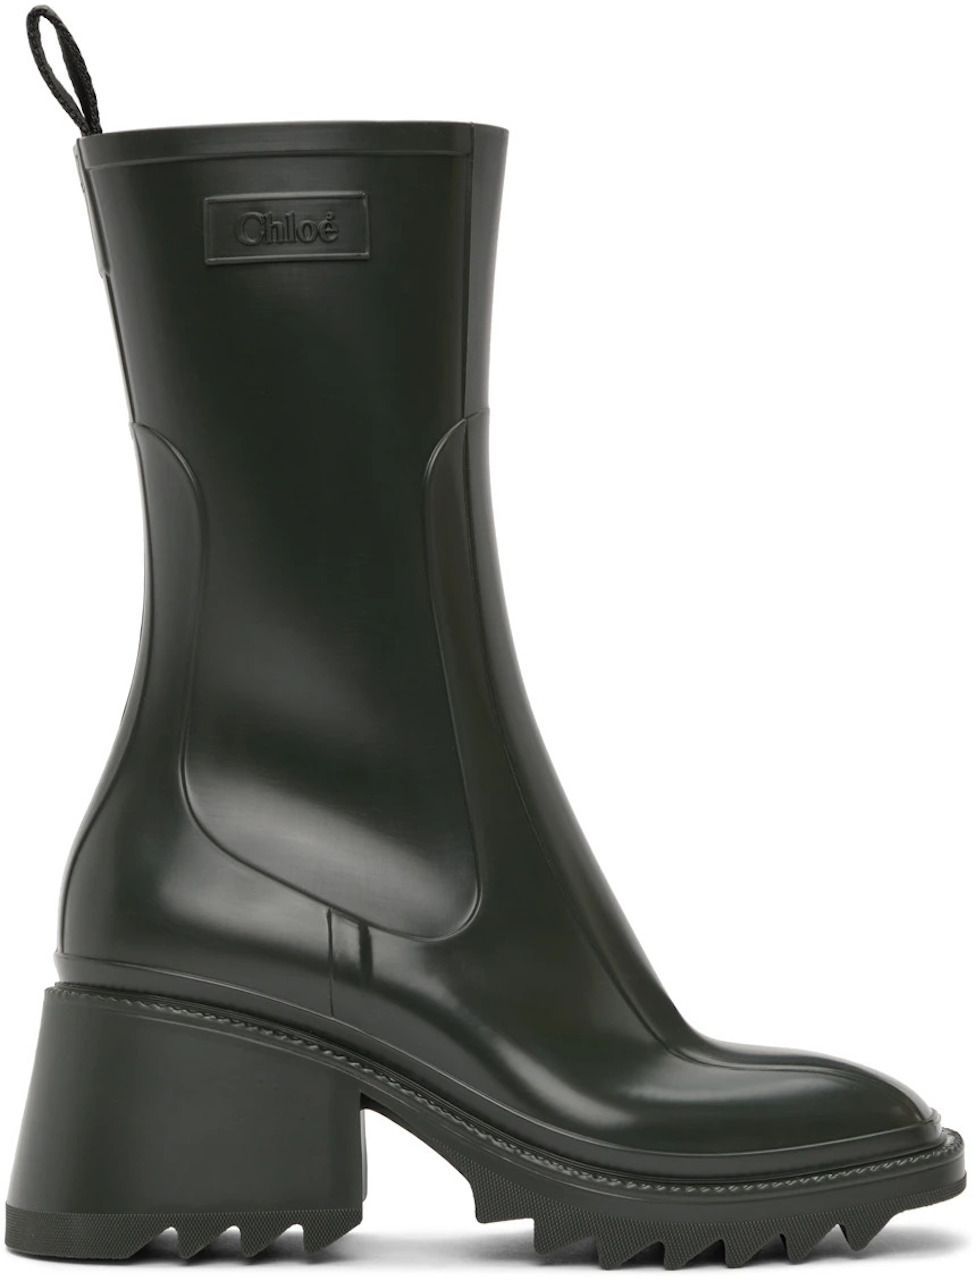 Most Stylish Waterproof Boots to Shop